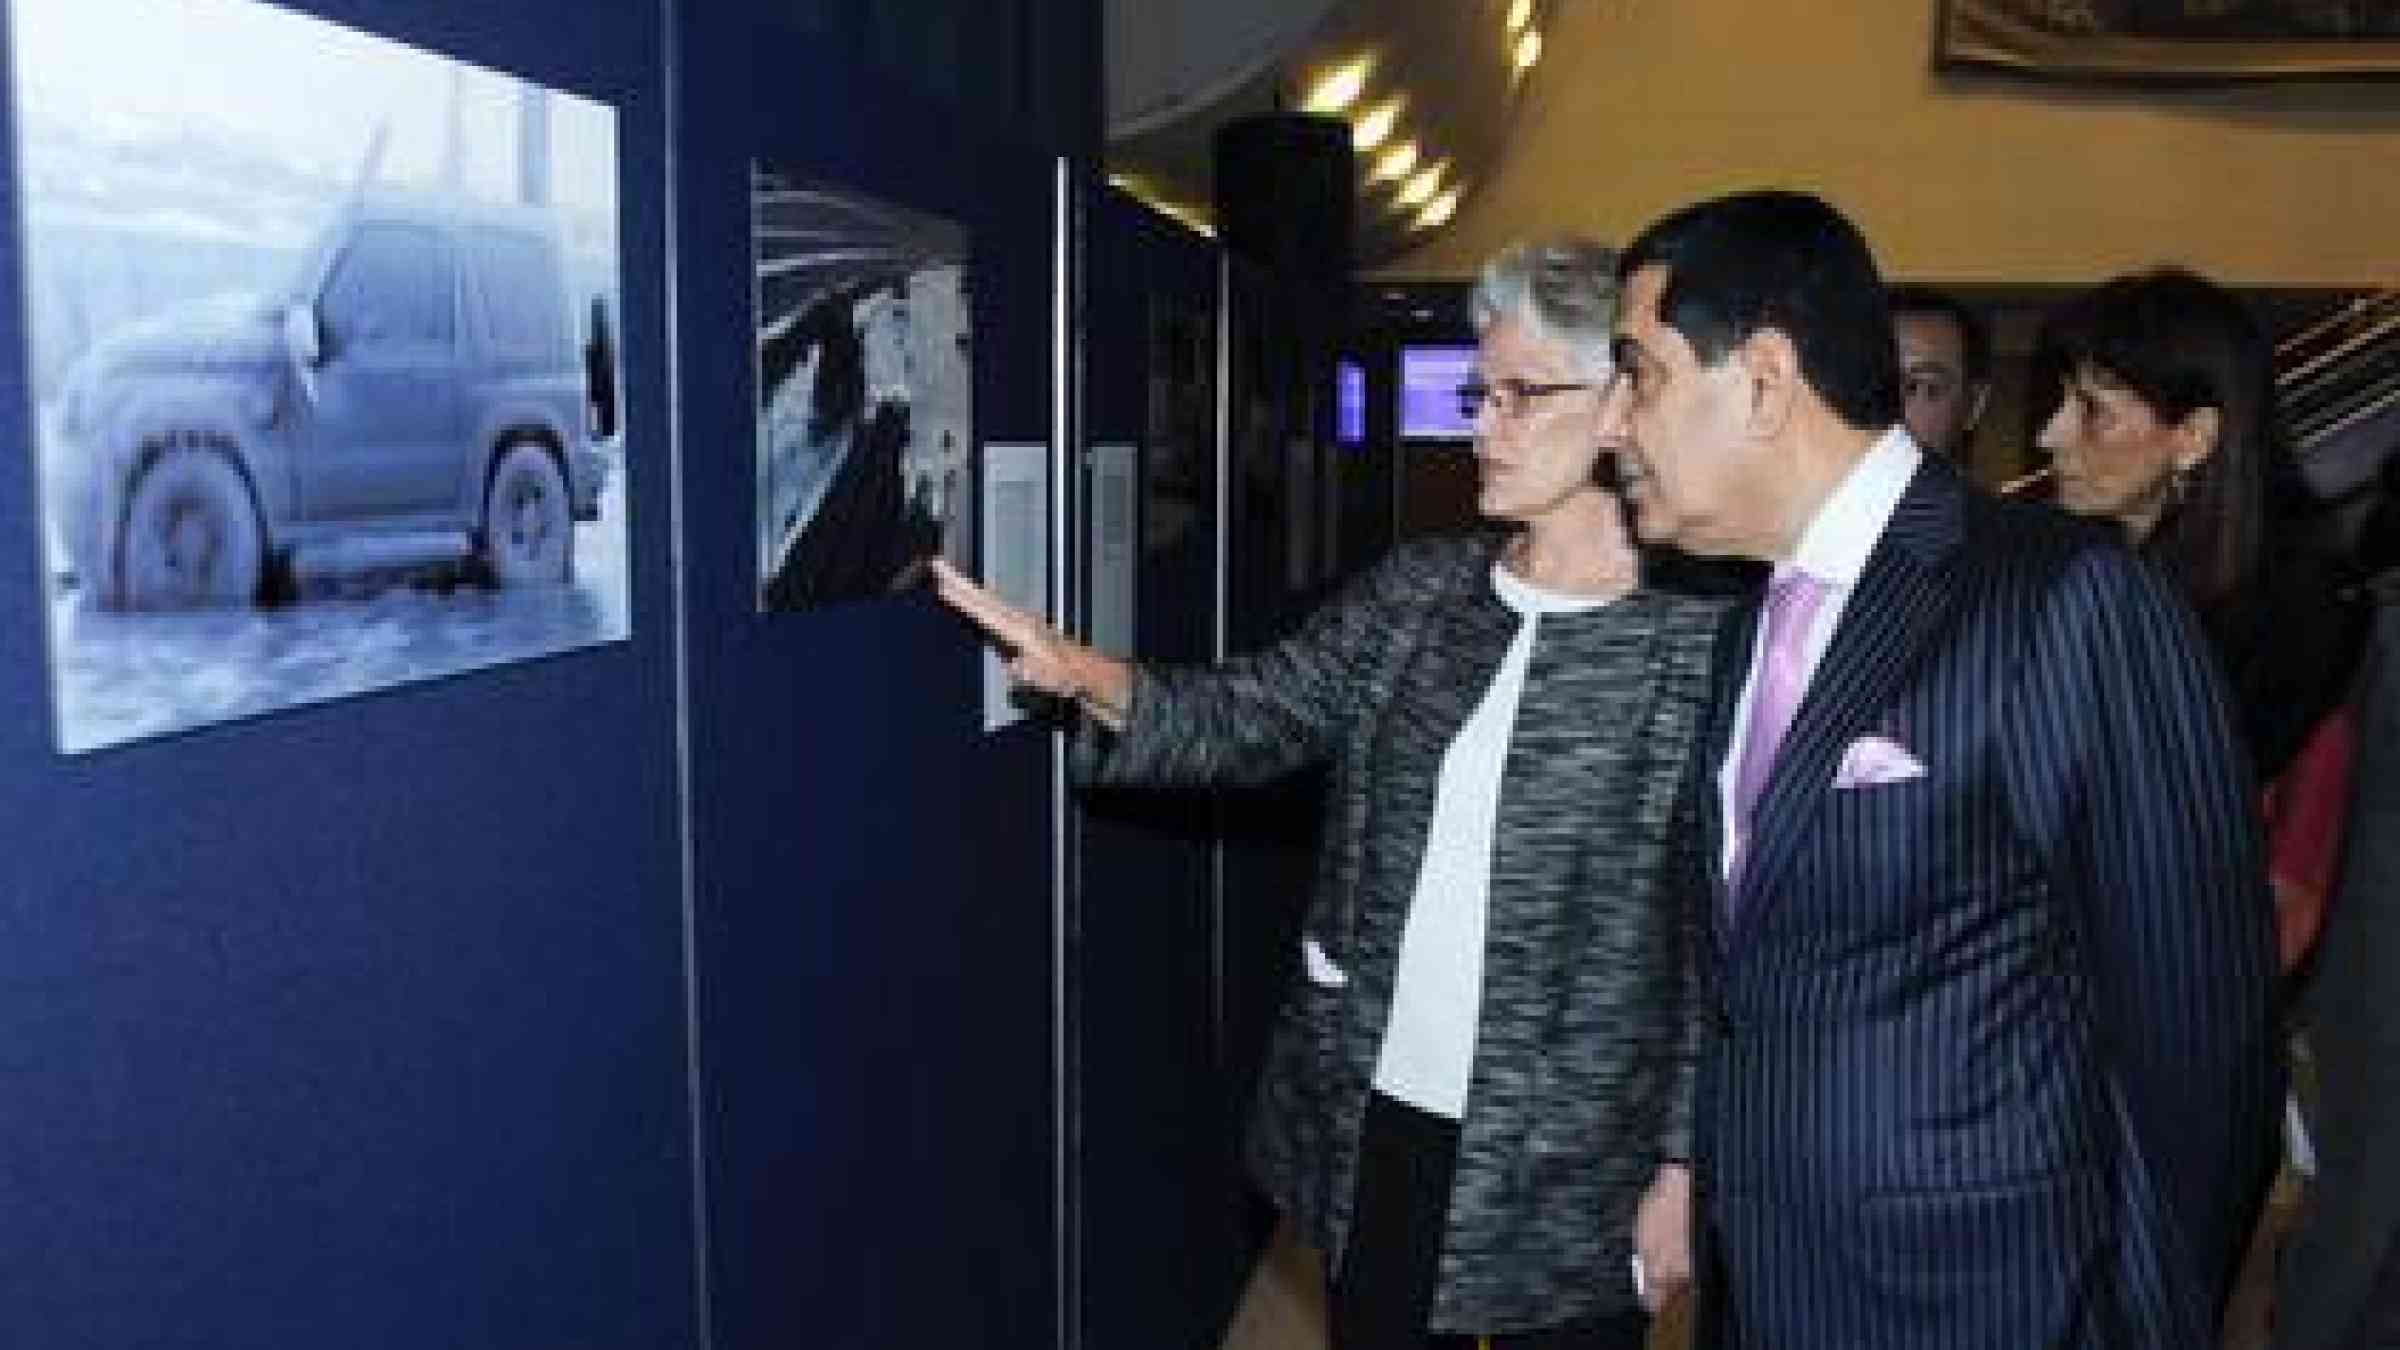 H.E Mr Nassir Abdulaziz Al-Nasser, President of the 66th Session of the UN General Assembly, with the Special Representative of the Secretary-General for Disaster Risk Reduction, Ms Margareta Wahlström, at the opening of the exhibition 'Saving the Day After Tomorrow: Accelerating sustainable development through disaster risk reduction' (UN Photo / Paulo Filgueiras)